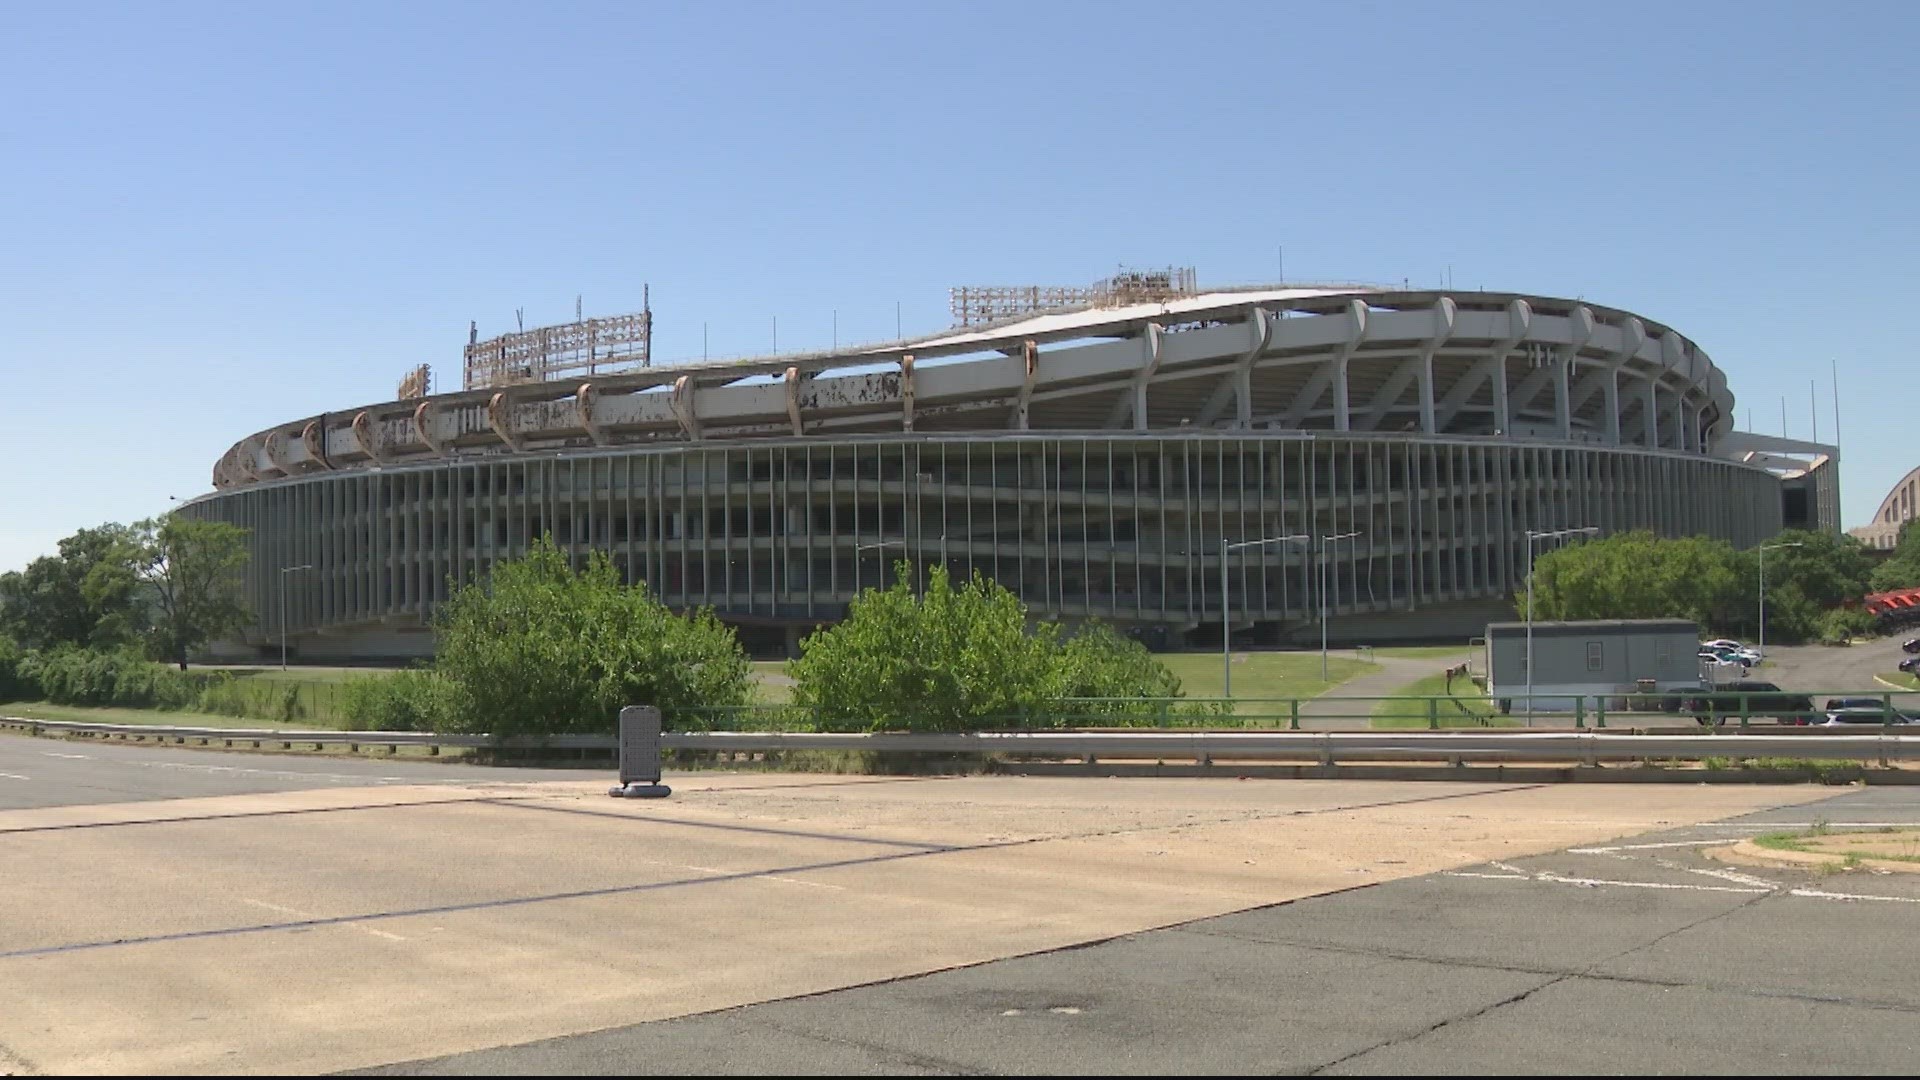 The agreement comes amid push to bring the Commanders back to RFK site, negotiations on taxpayer funded renovations at Capitol One Arena.